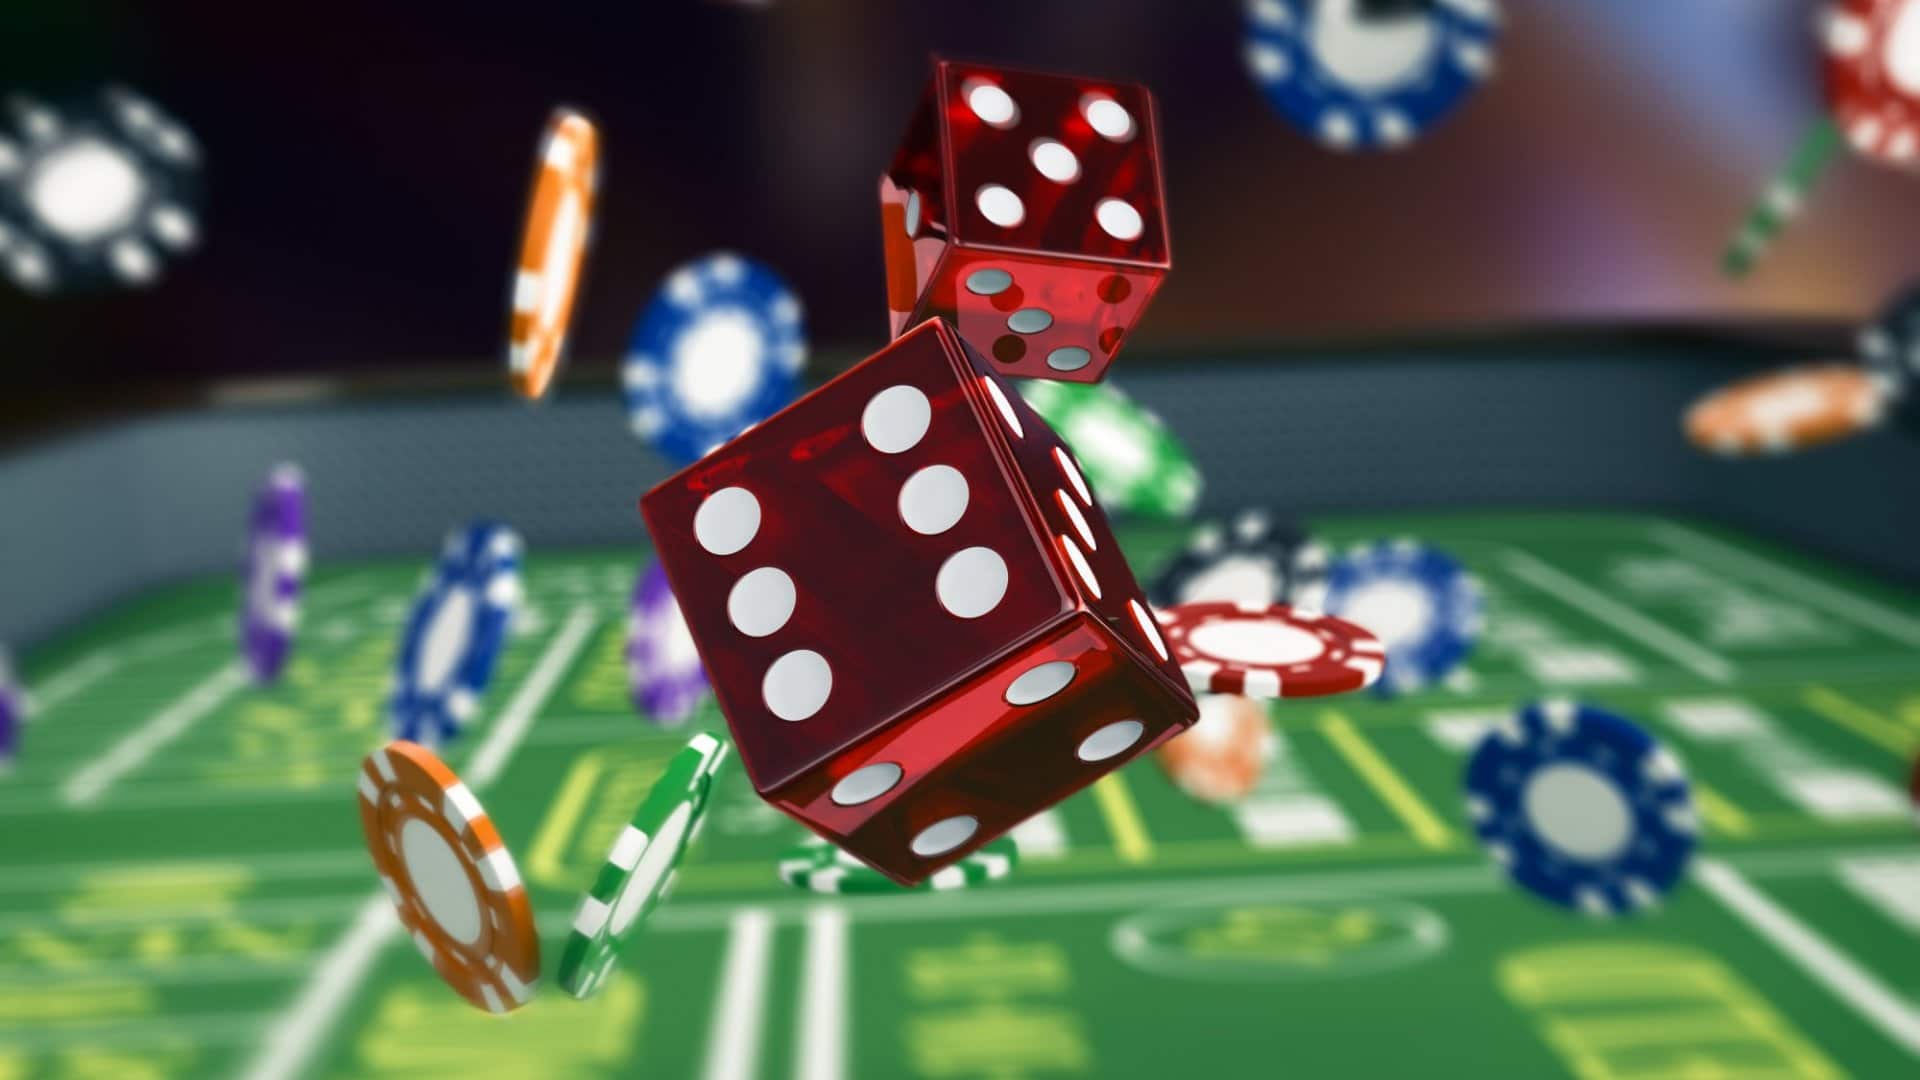 Can casino strategy ebooks help players? - Good e-Reader